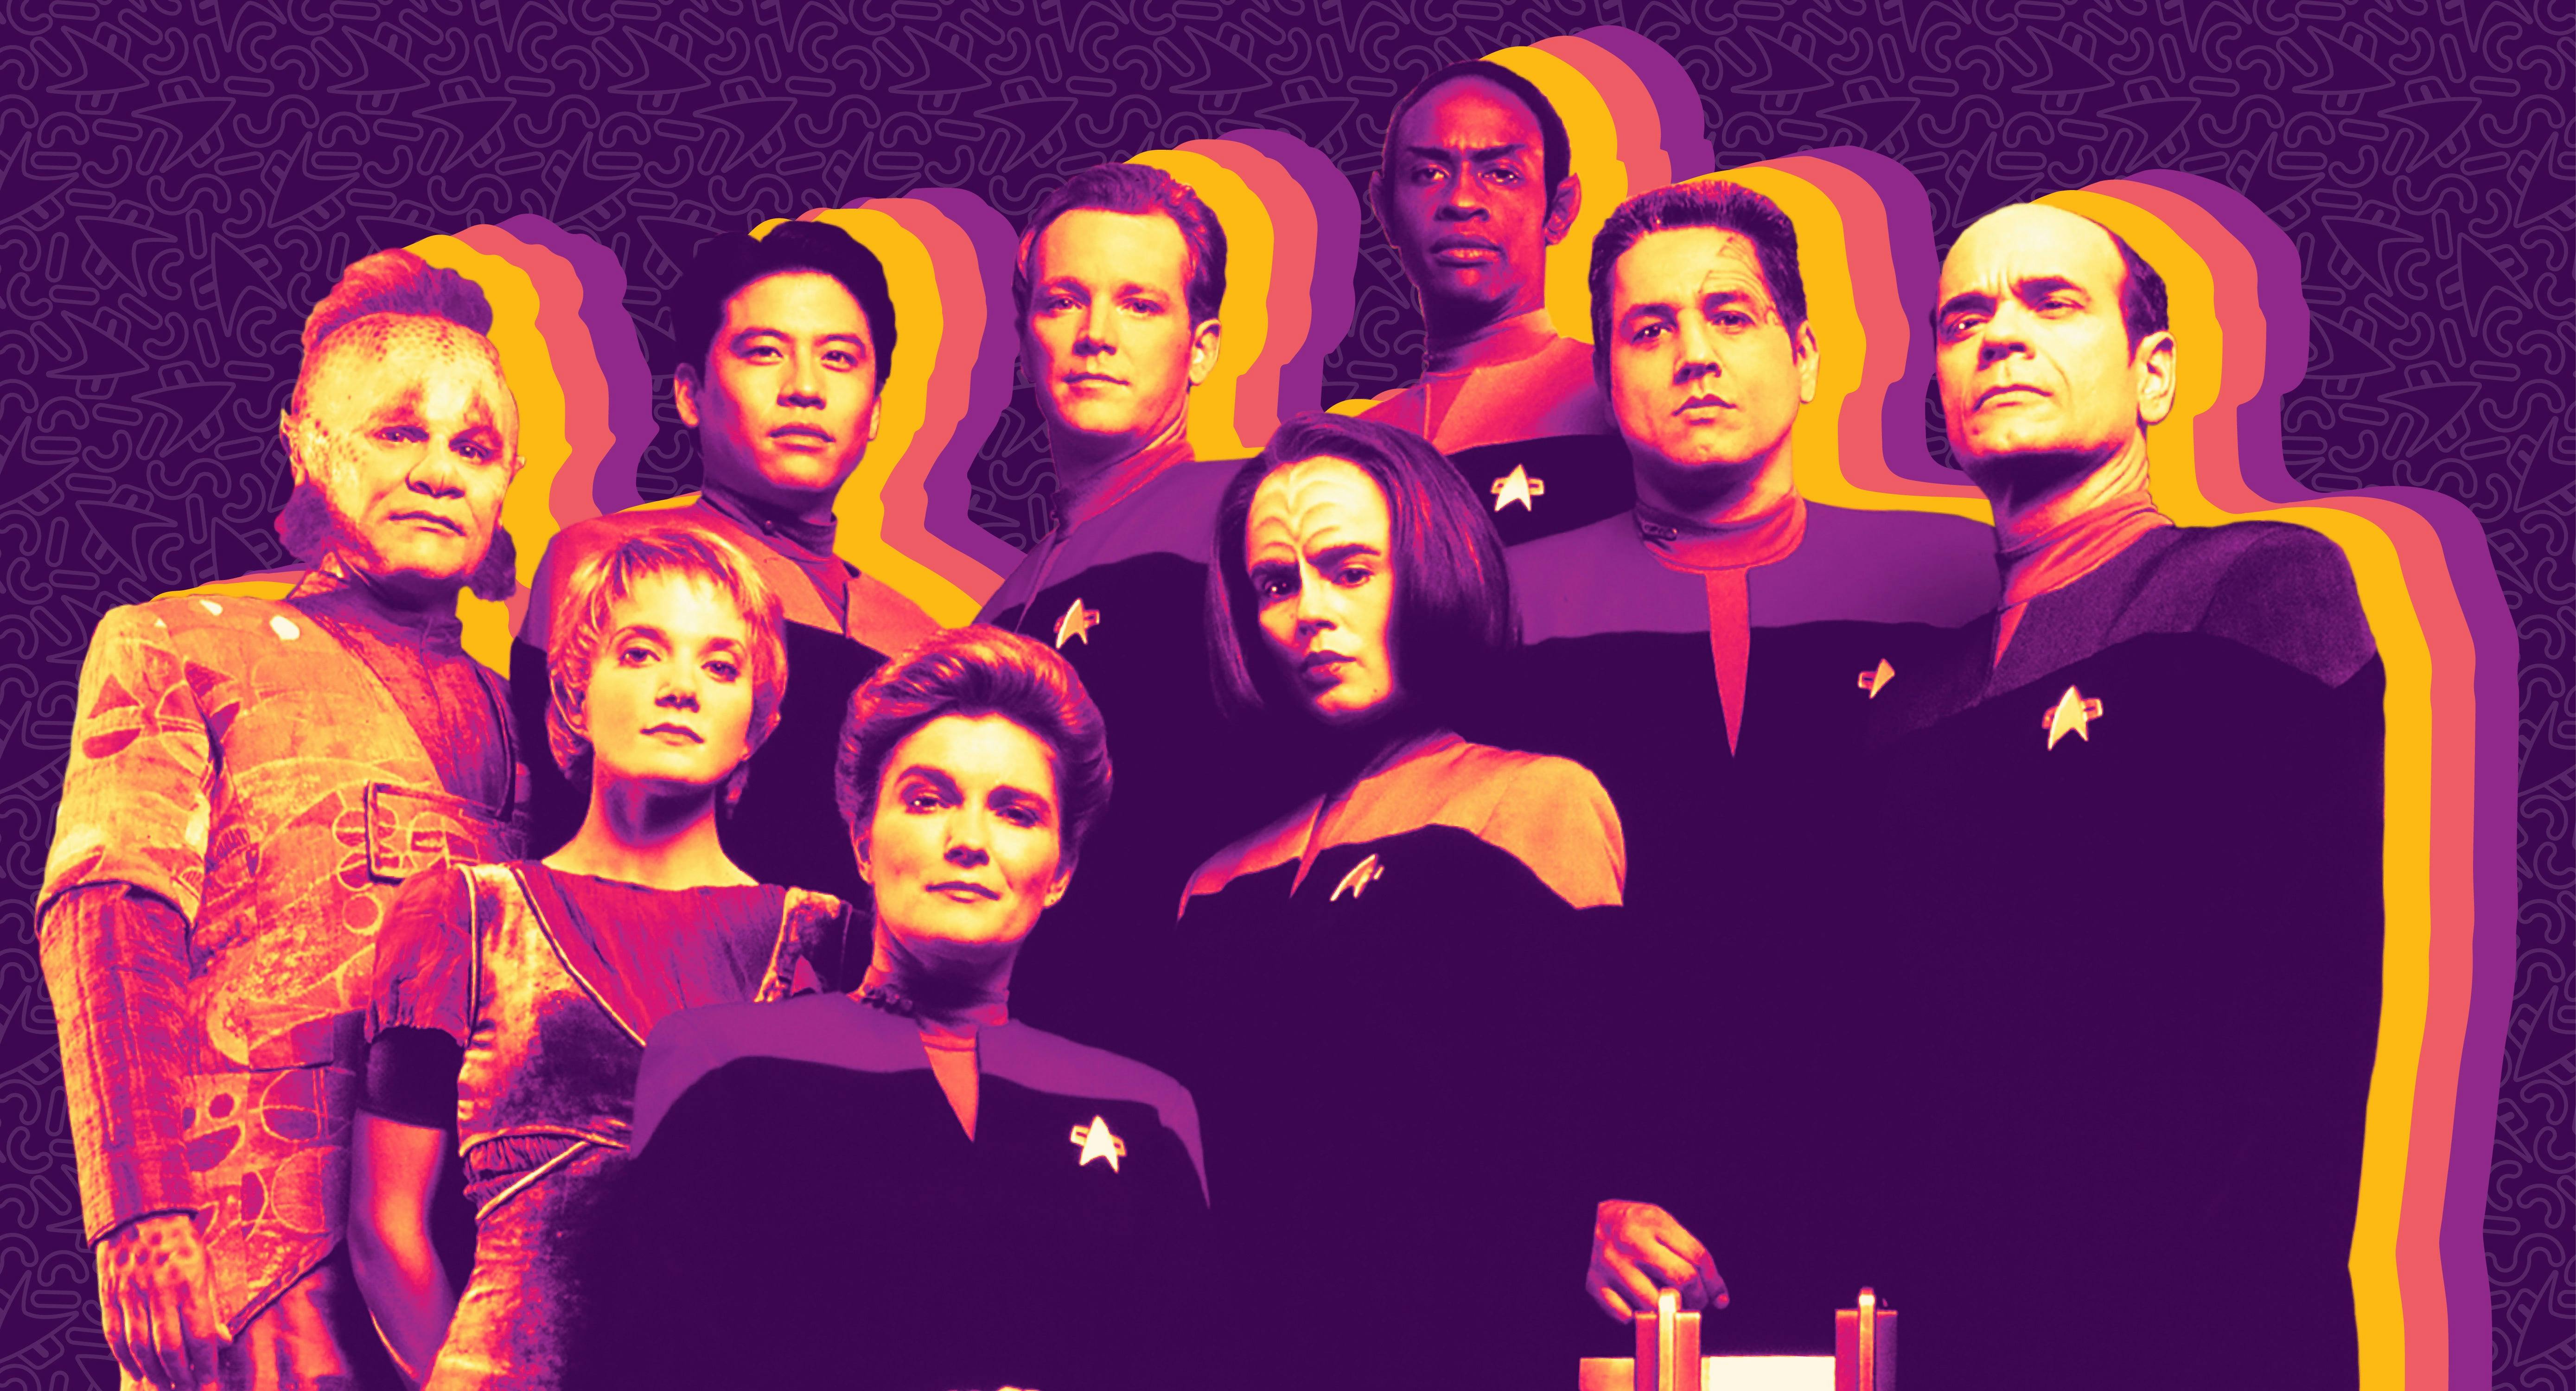 Illustrated banner of the Star Trek: Voyager series cast photo